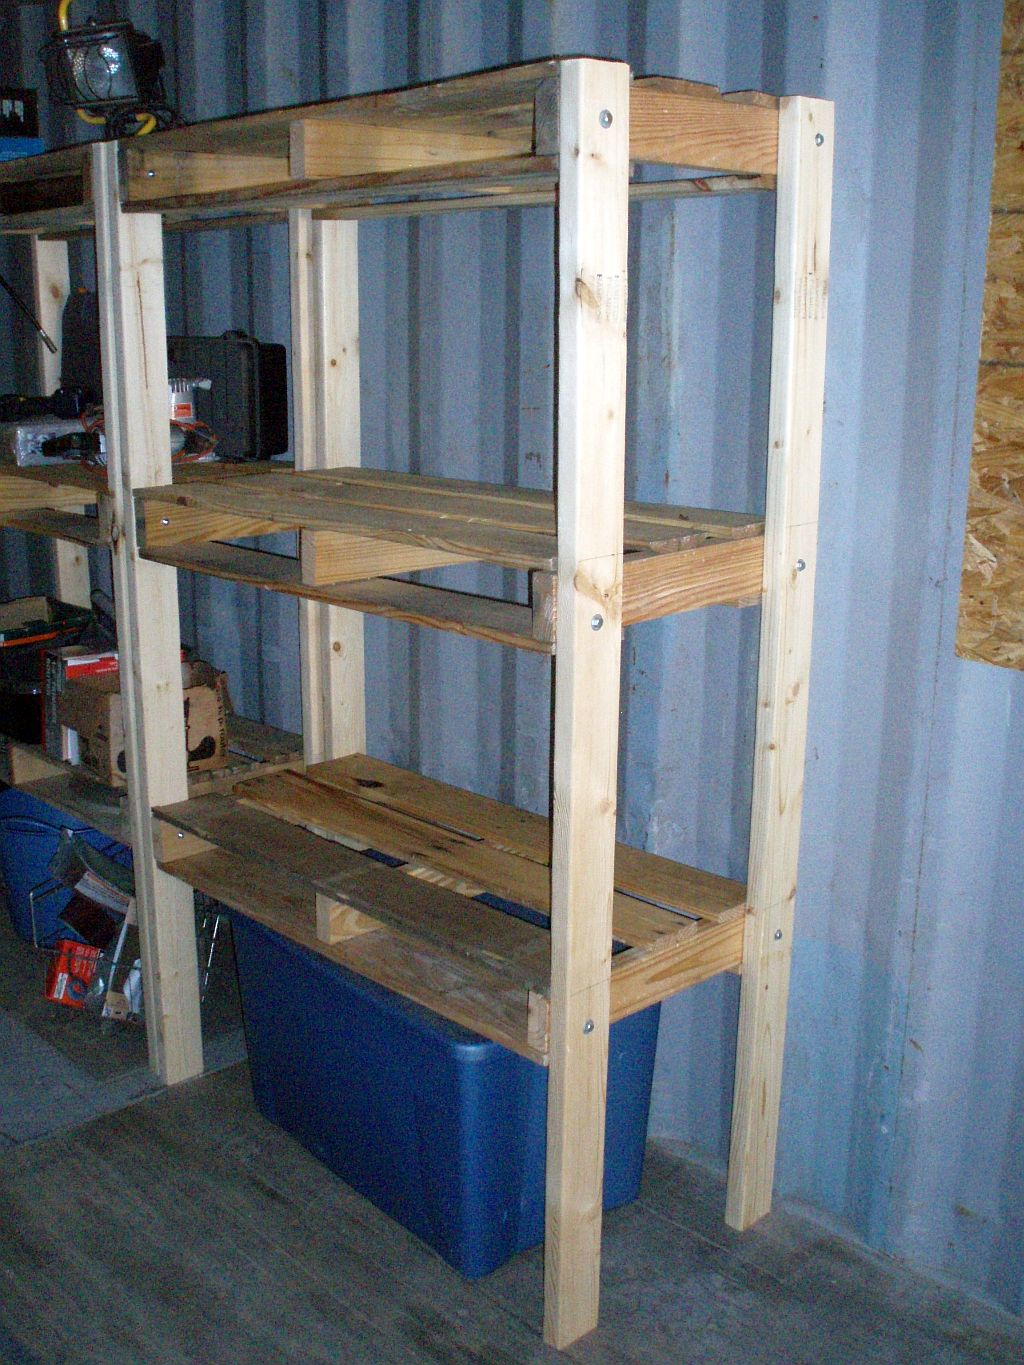 the pallet shed finished, I've started a chicken coop made of wood 